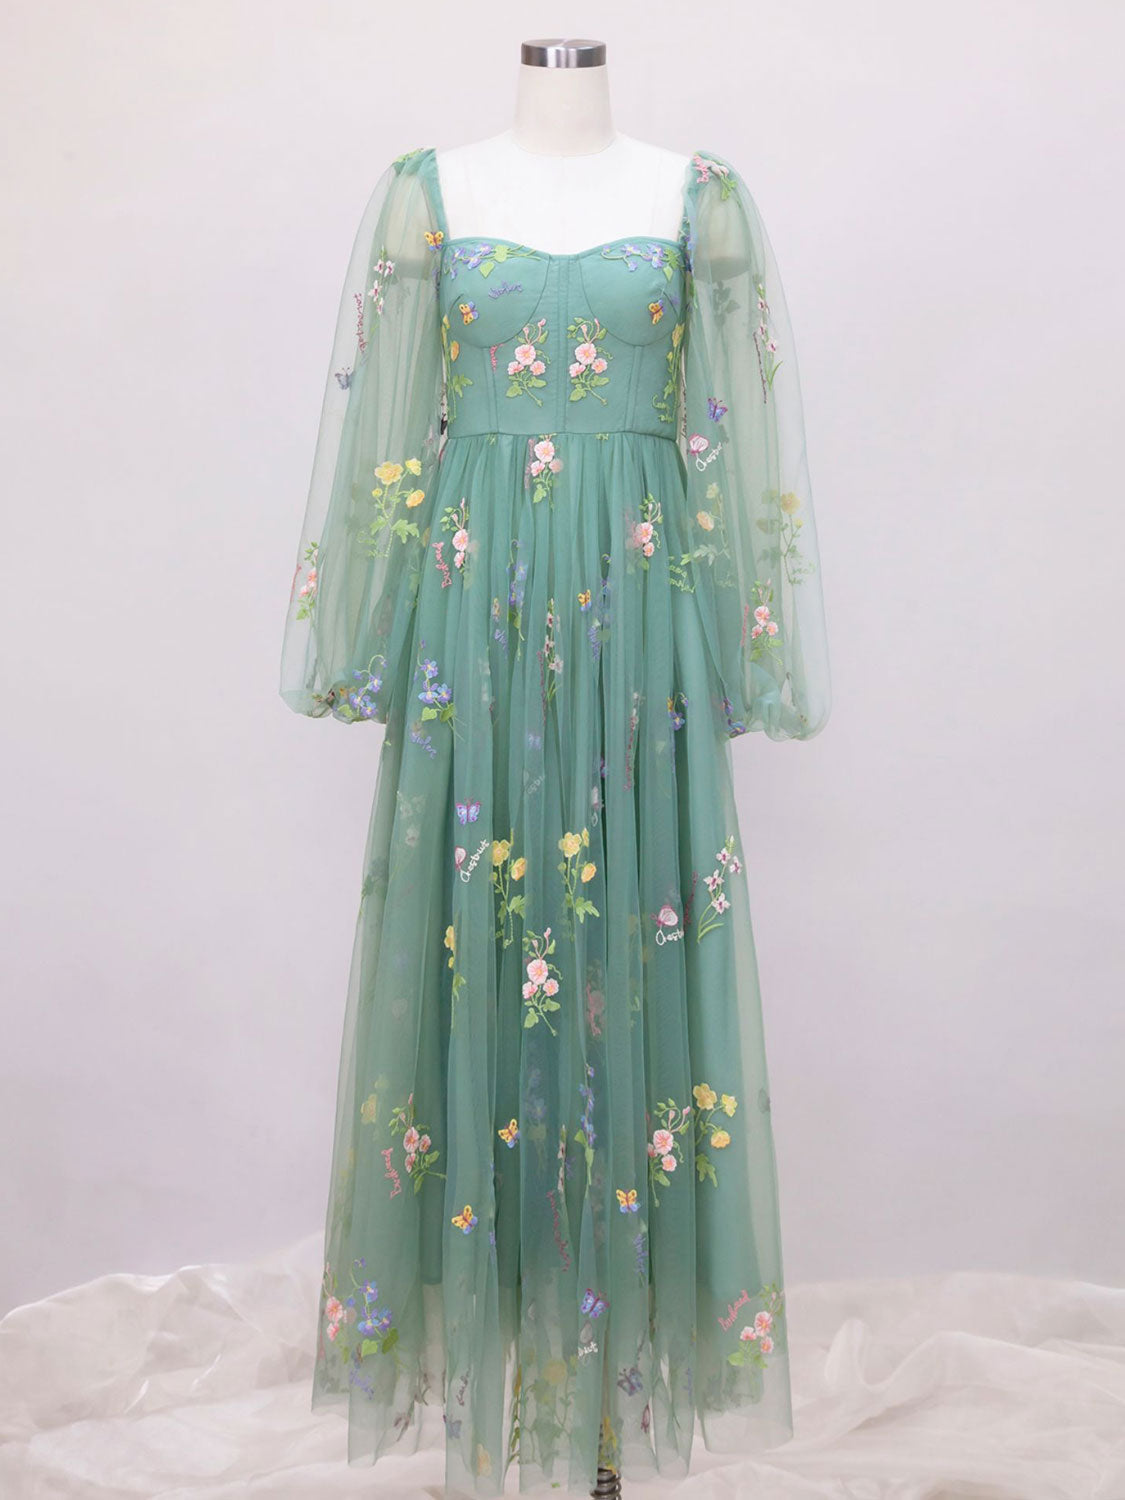 Boho Green Lace Corset Tea Length Prom Dress with Long Sleeves - DollyGown